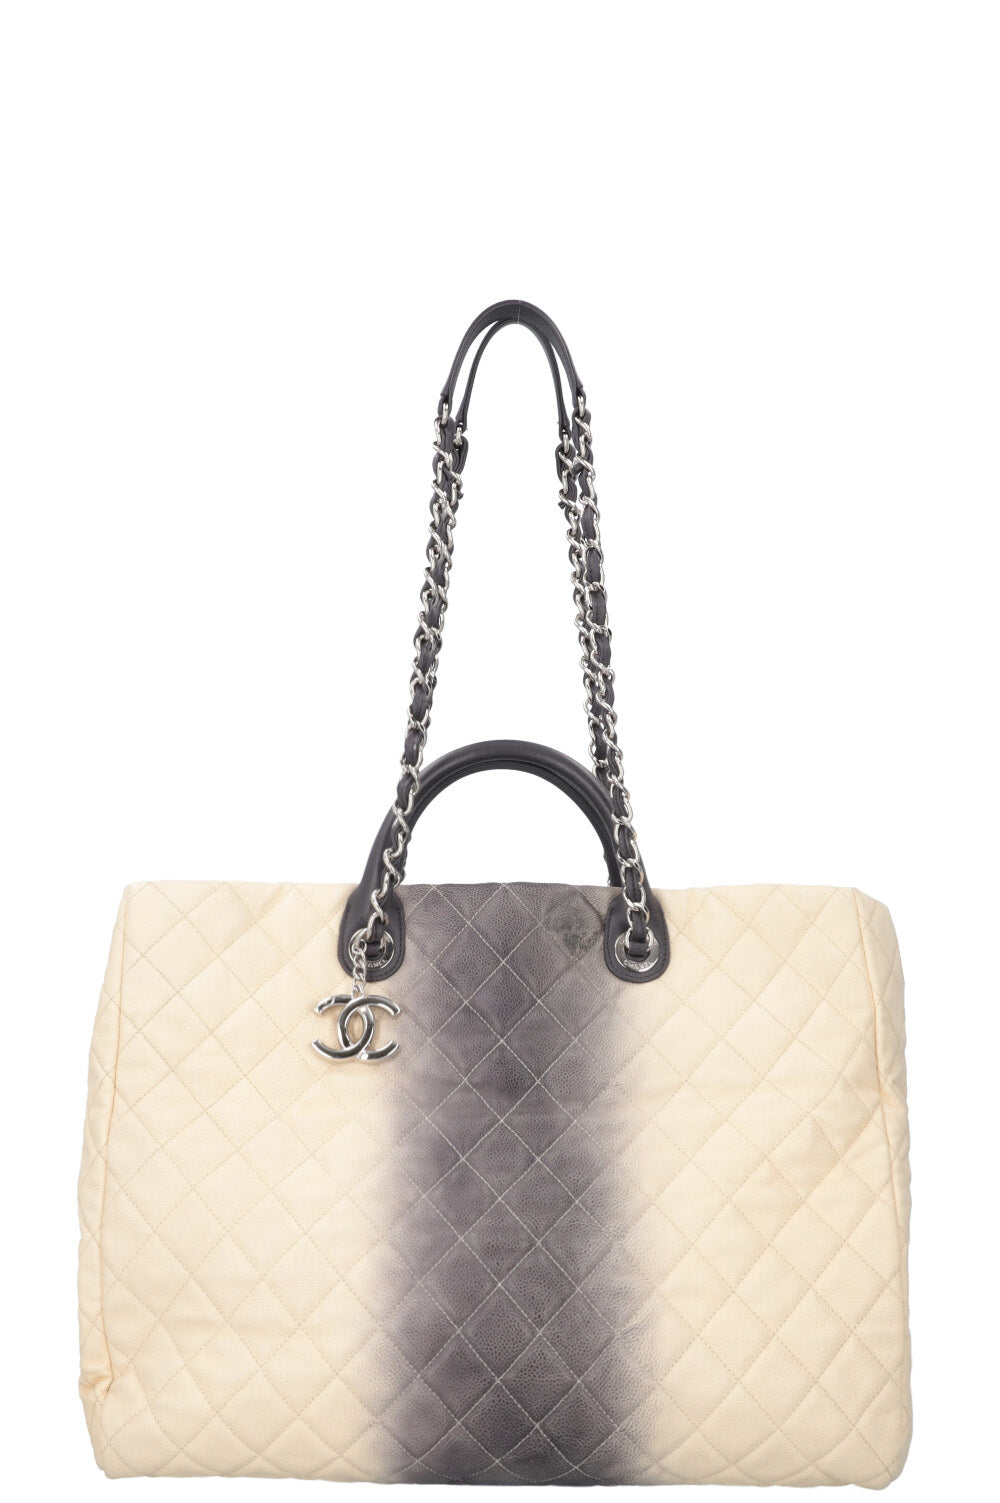 CHANEL GST Shopping Tote Caviar Leather Grey Beige